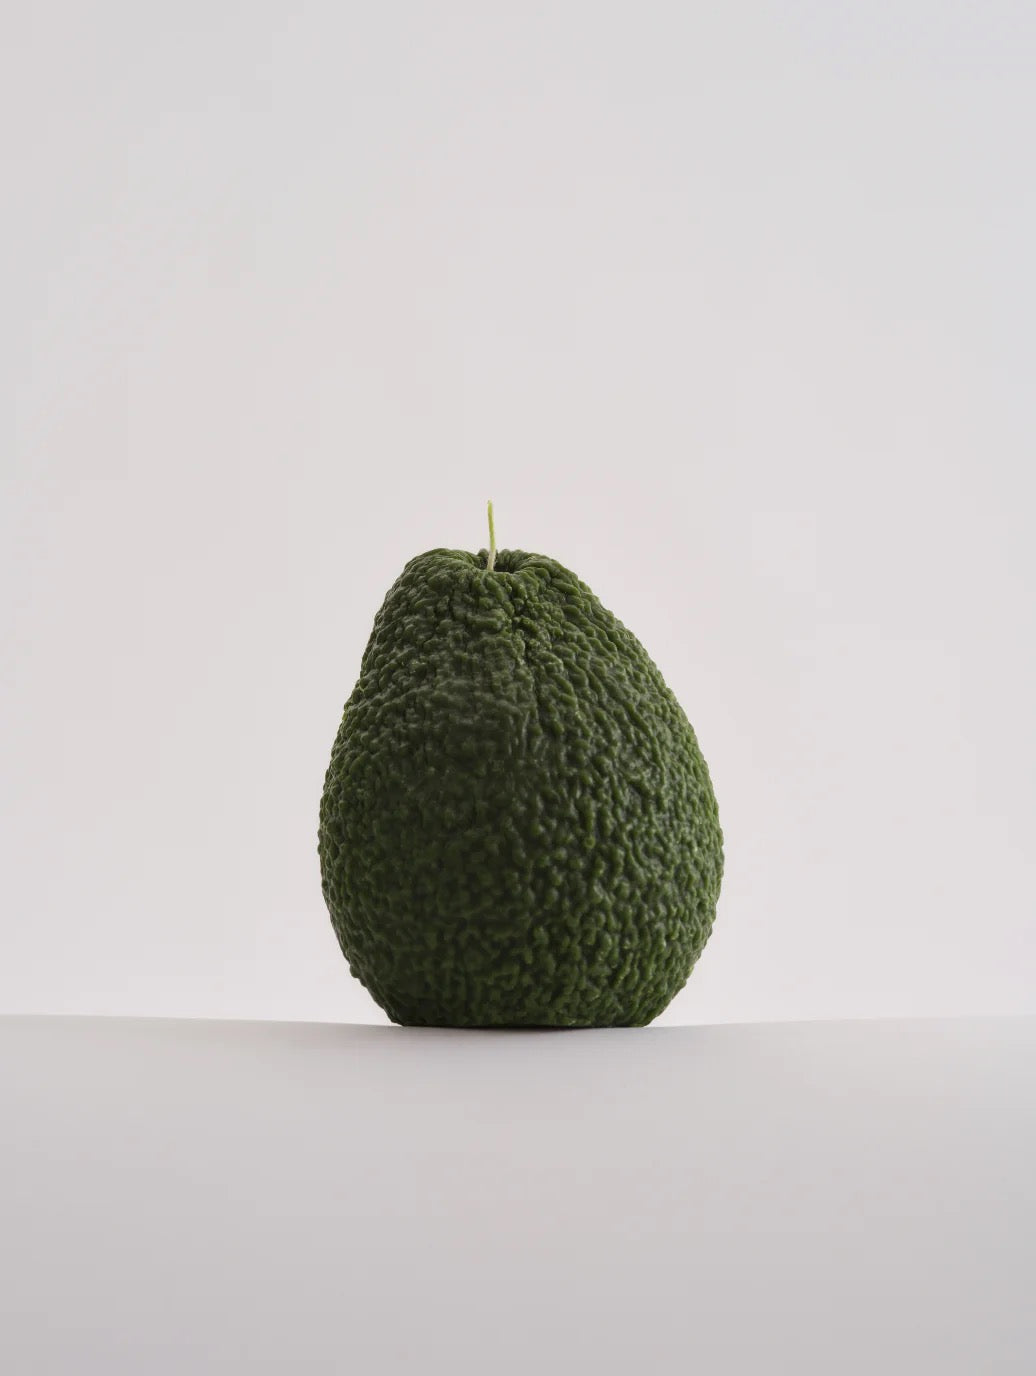 A hand-made Nonna&#39;s Grocer Avocado Candle – Small crafted from a soy wax blend, delicately placed on a white surface.